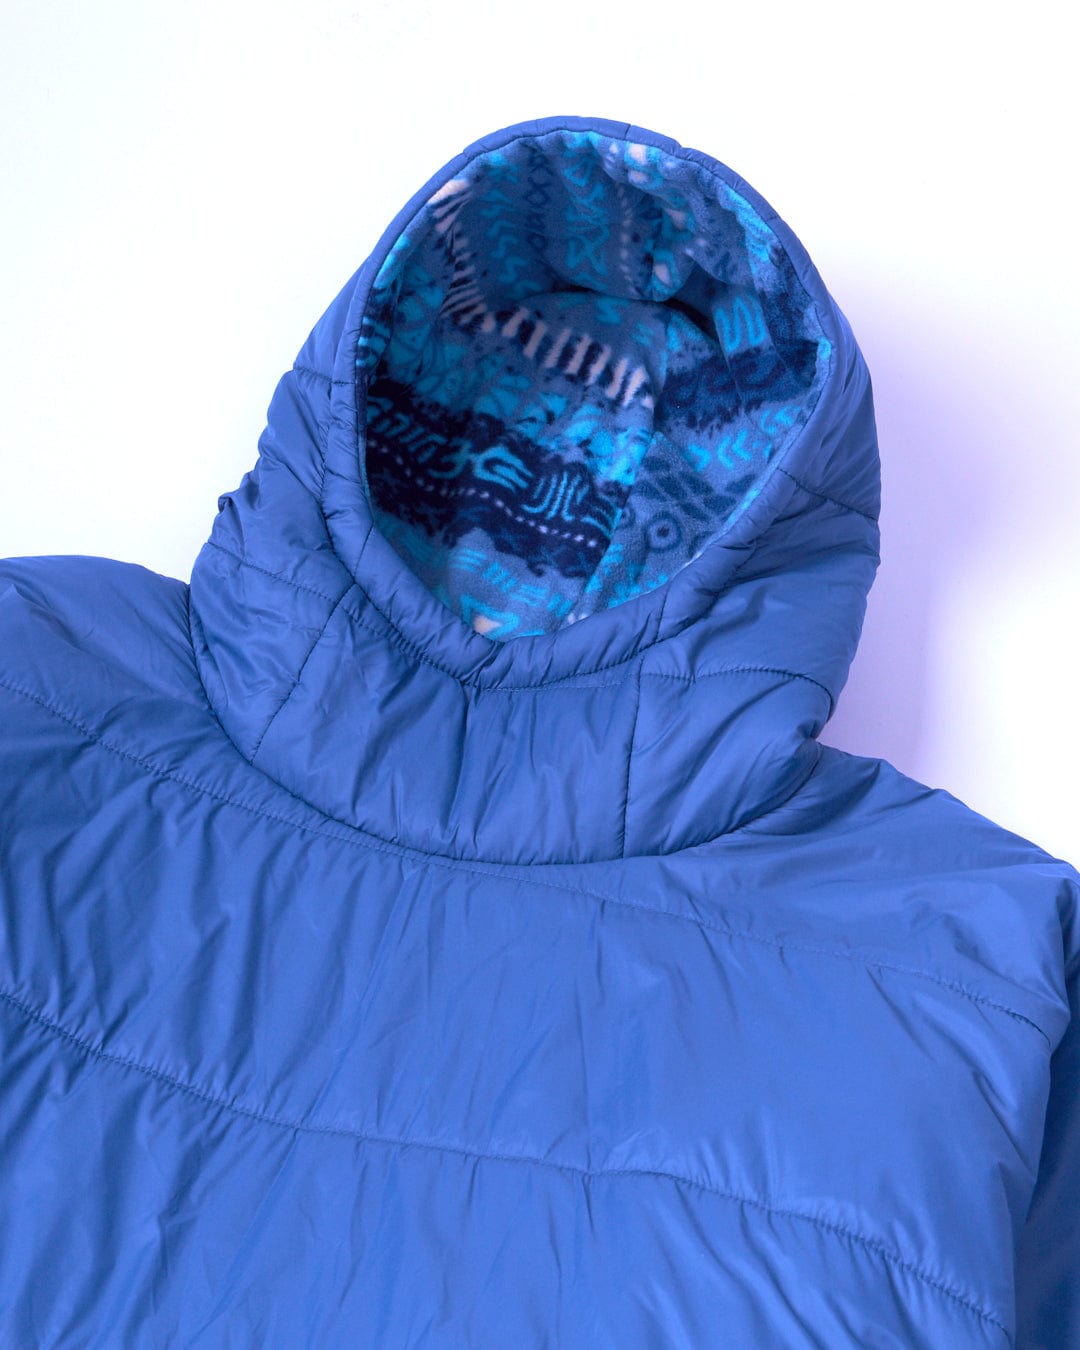 A water-resistant Saltrock blue hooded jacket made from recycled materials on a white surface.